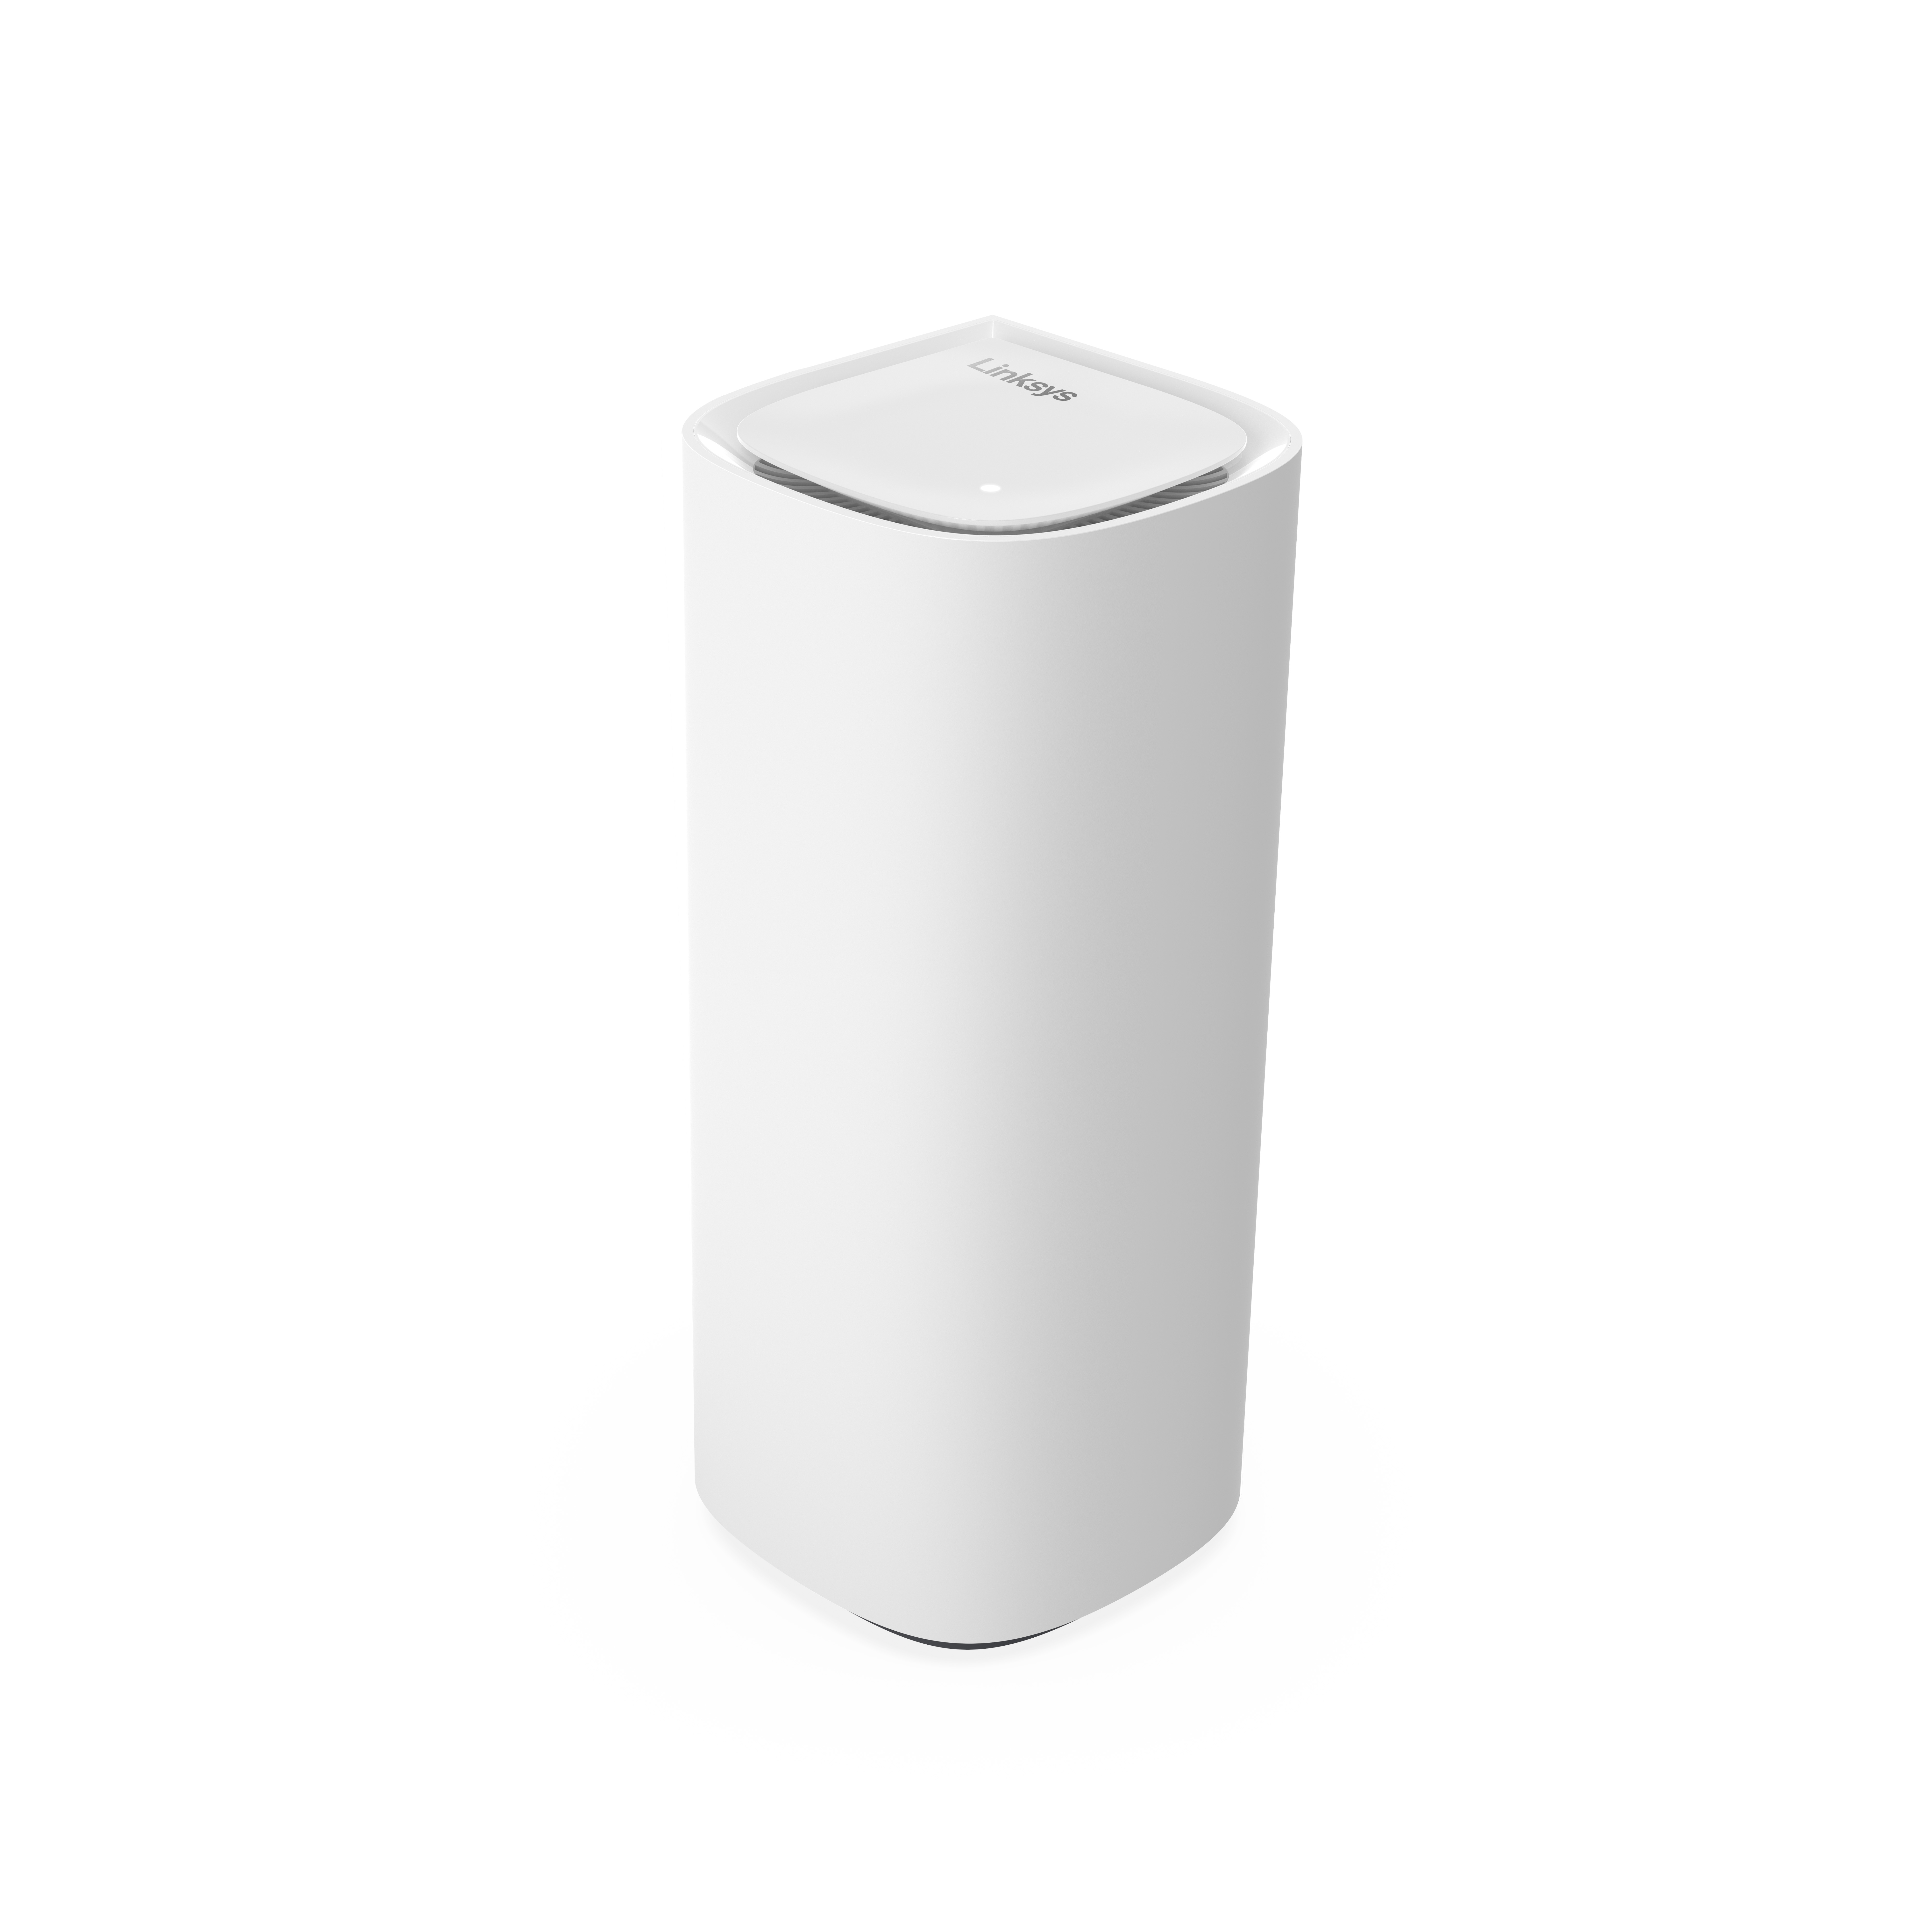 Velop Pro 7 MBE7001 Tri-Band Mesh WiFi 7 Router